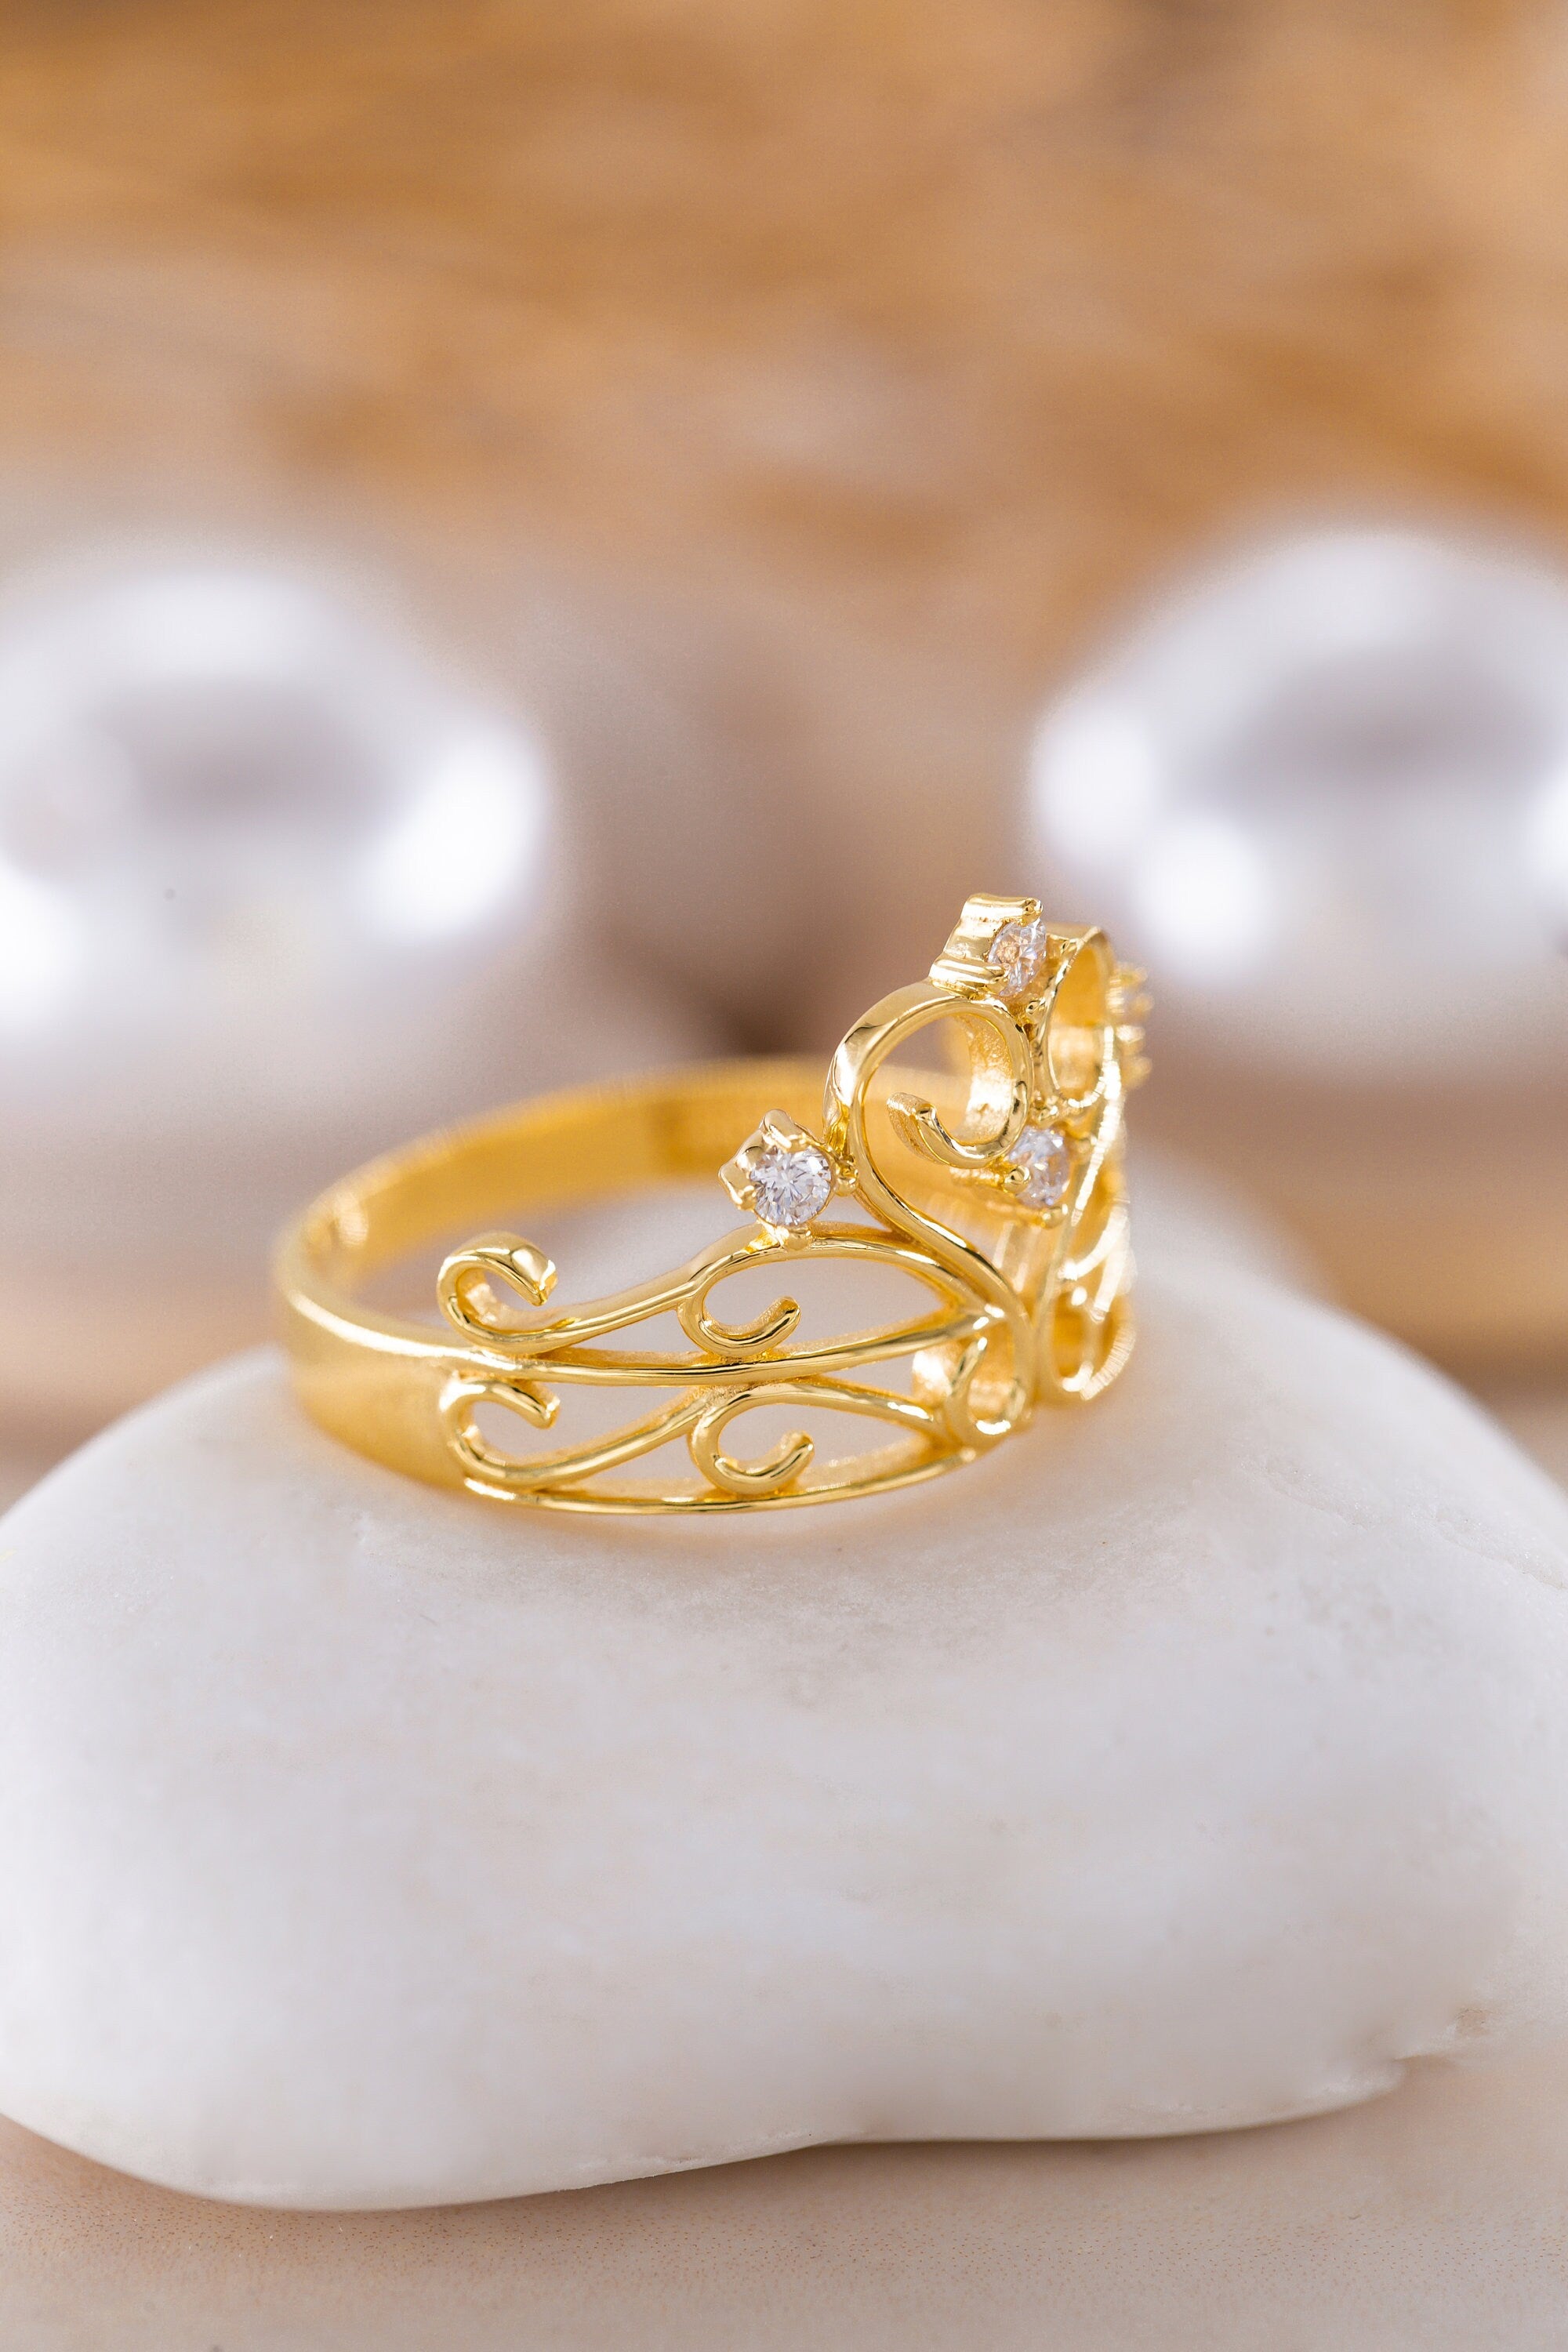 14K Golden Princess Crown Ring 925 Sterling Silver Handmade Crystal Crown Ring, Crystal Crown Ring, Royal Queen Unique Ring, Rings for Women